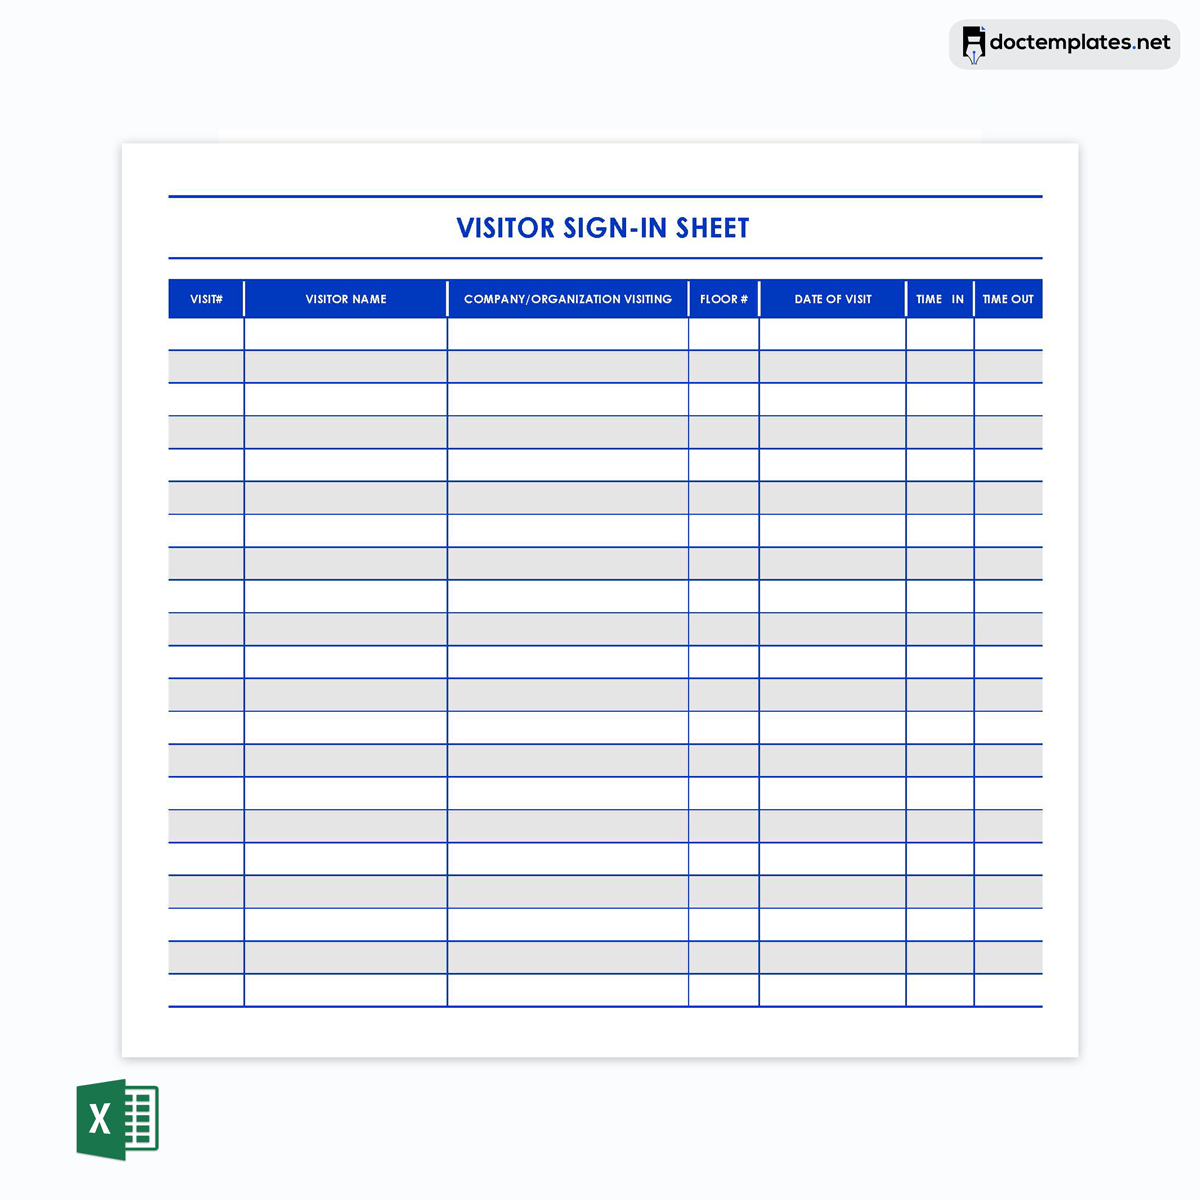 Meeting sign-in sheet